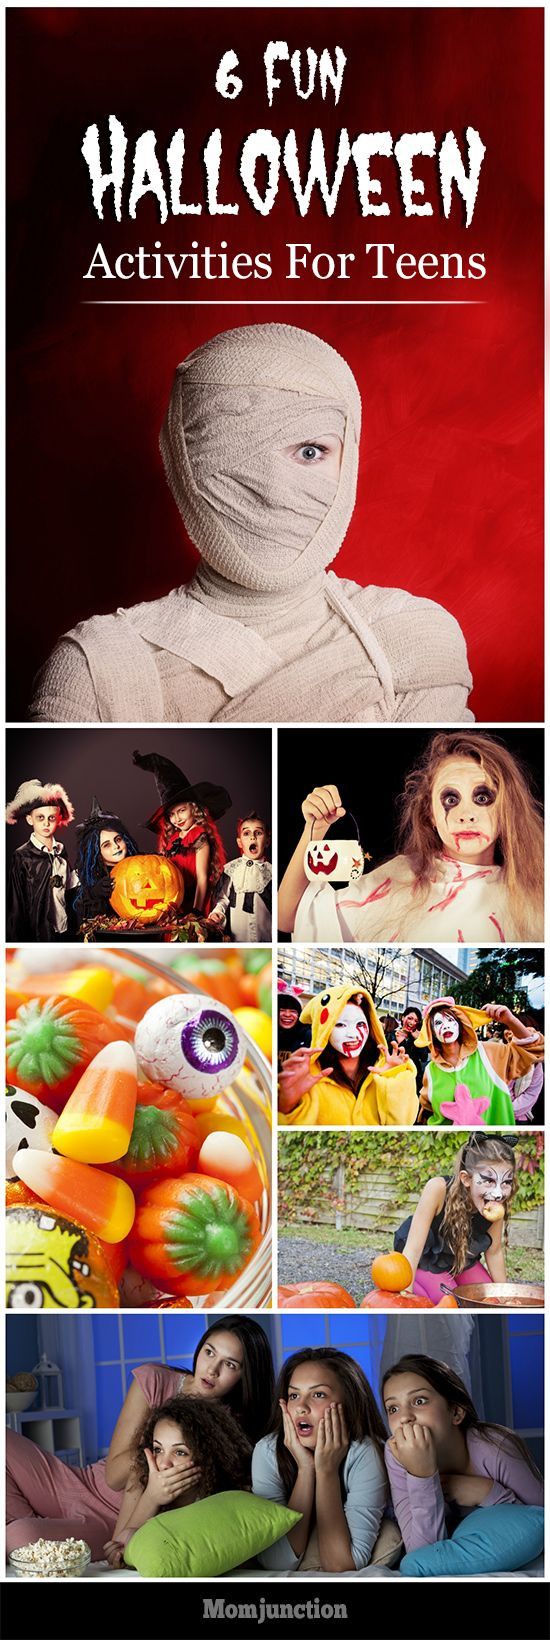 Halloween Party Ideas Teenagers
 307 best images about Teen Topics on Pinterest